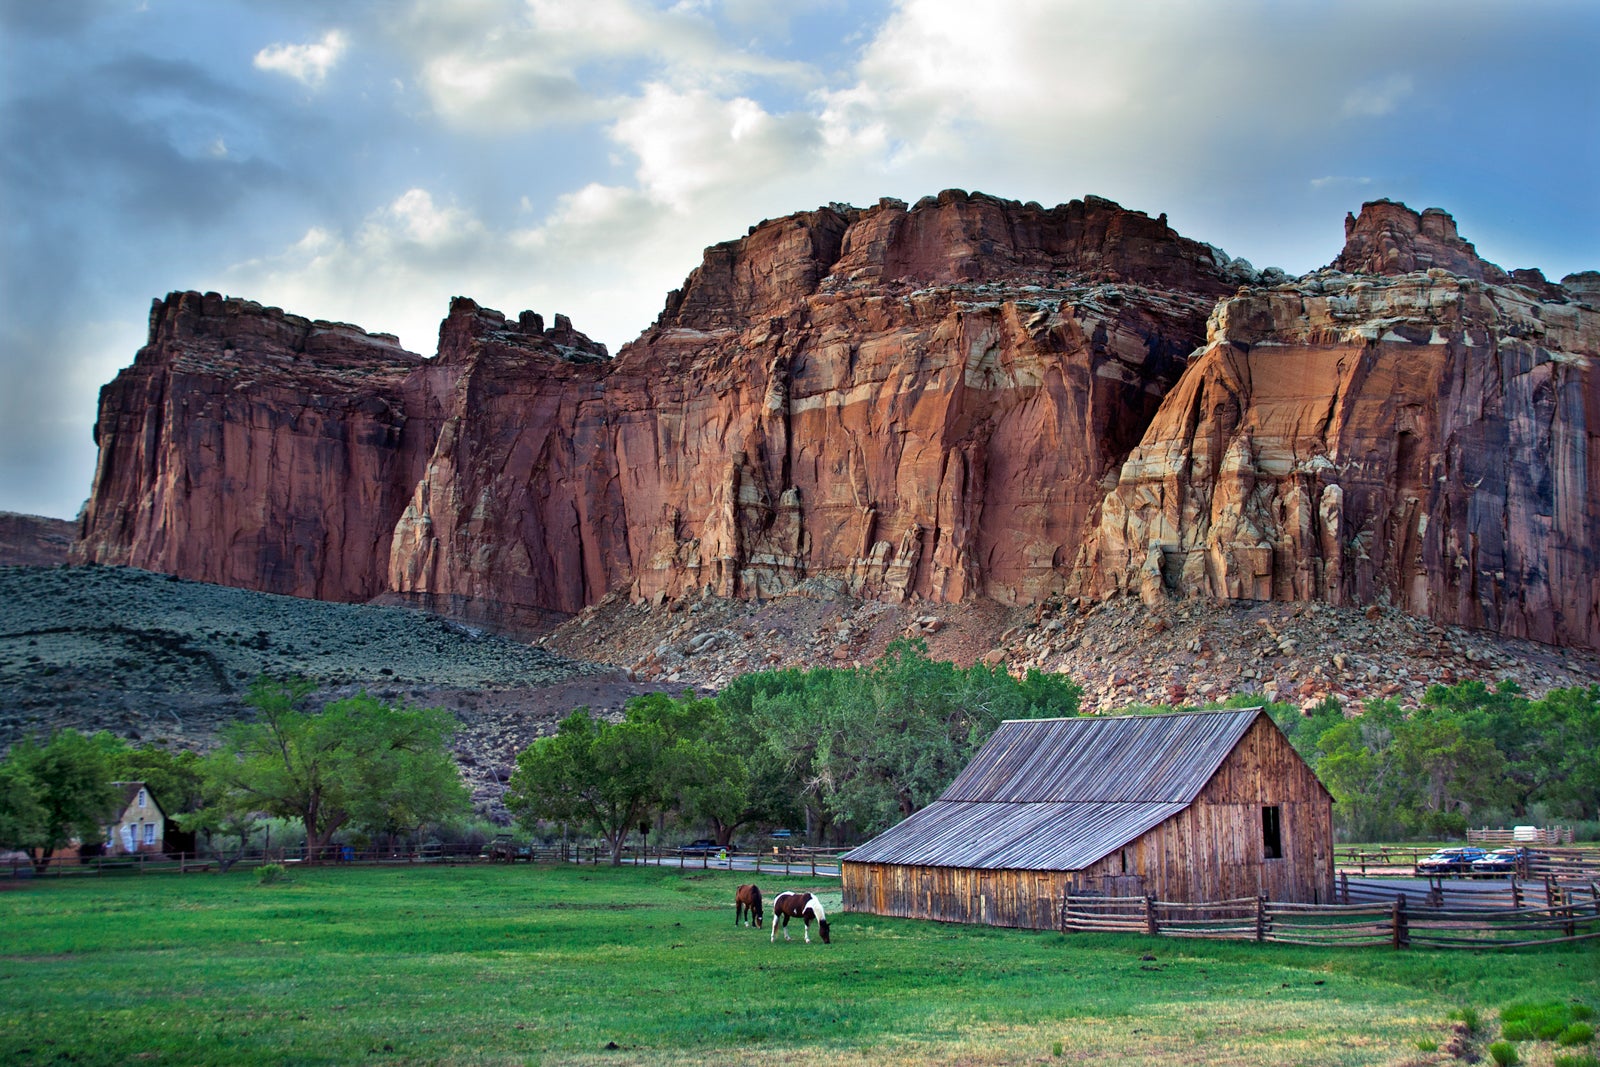 photo of cliffs and rock formations in the background with a cabin sitting in a green field in the foreground